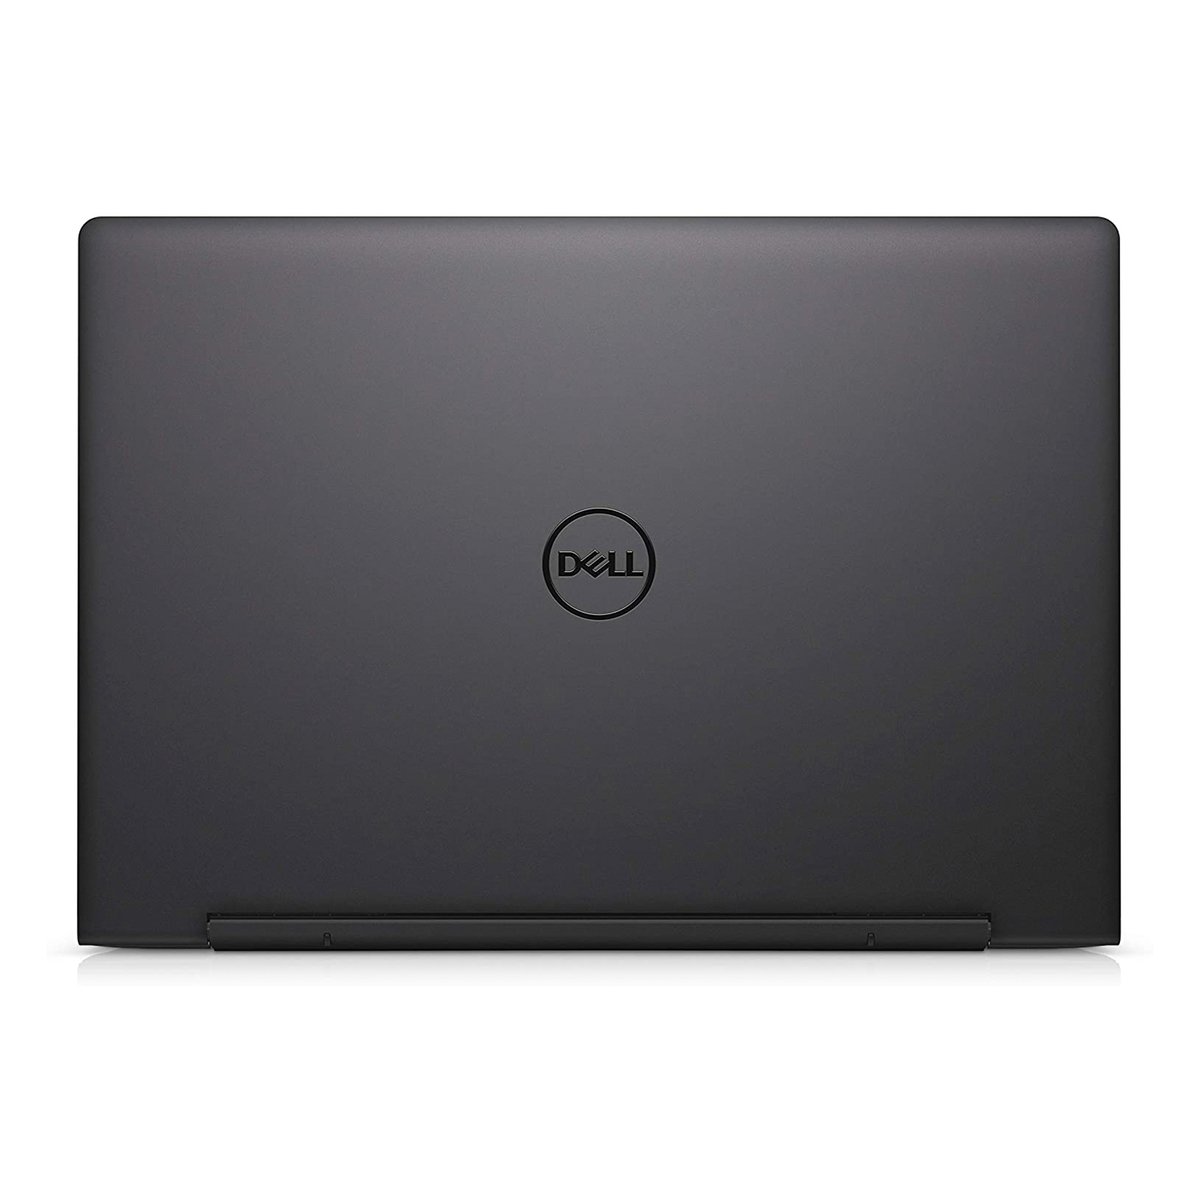 Dell Inspiron 13 (7391-INS-1325) Convertible Touch Laptop,Core i7  ,16GBRAM, 1TBSSD,Intel(R) UHD Graphics,Windows 10,13.3inch FHD ,Black